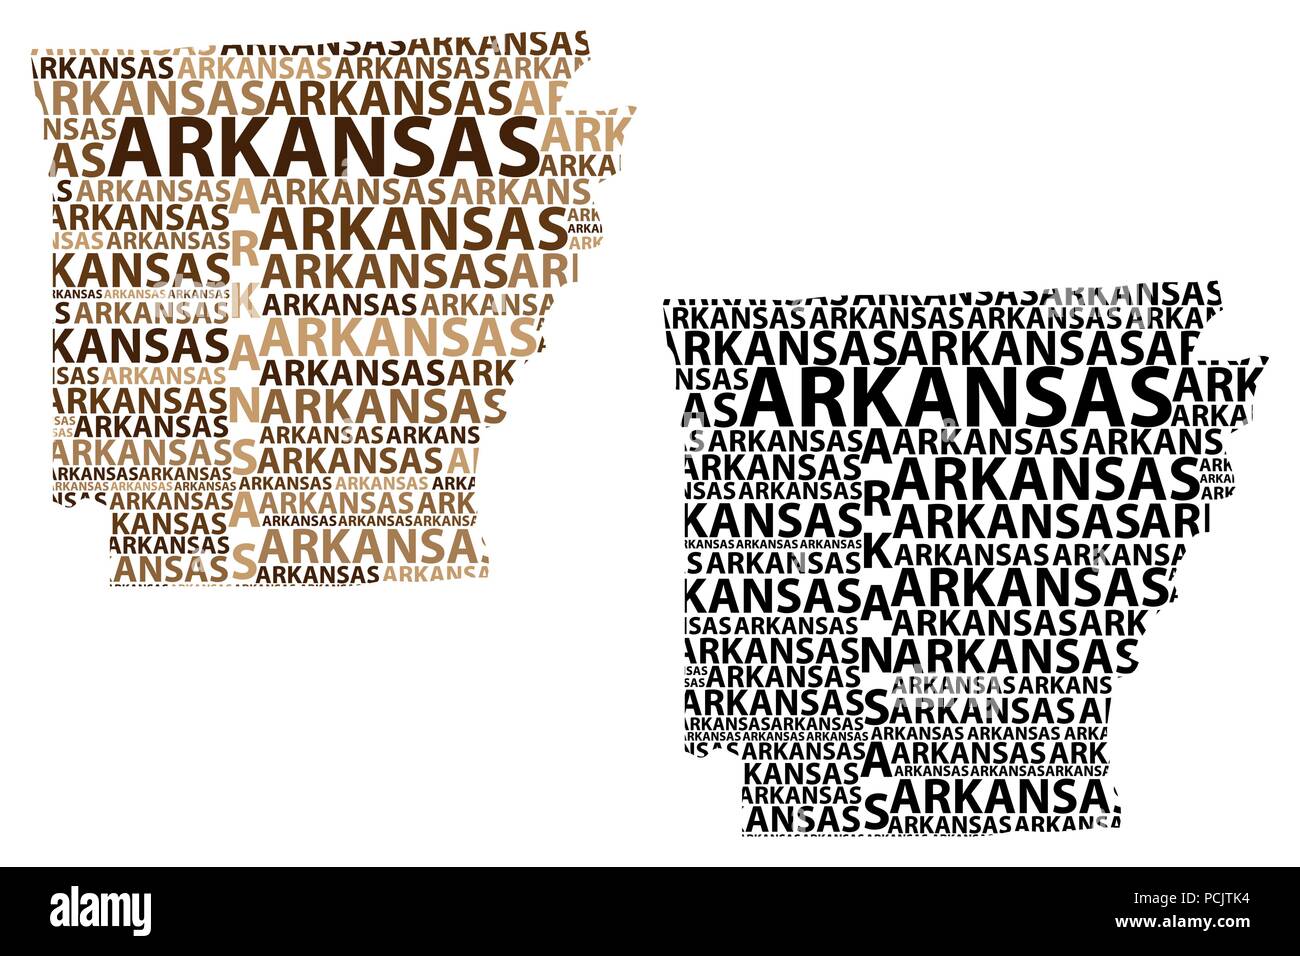 Sketch Arkansas (United States of America, The Natural State, The Bear State) letter text map, Arkansas map - in the shape of the continent, Map Arkan Stock Vector